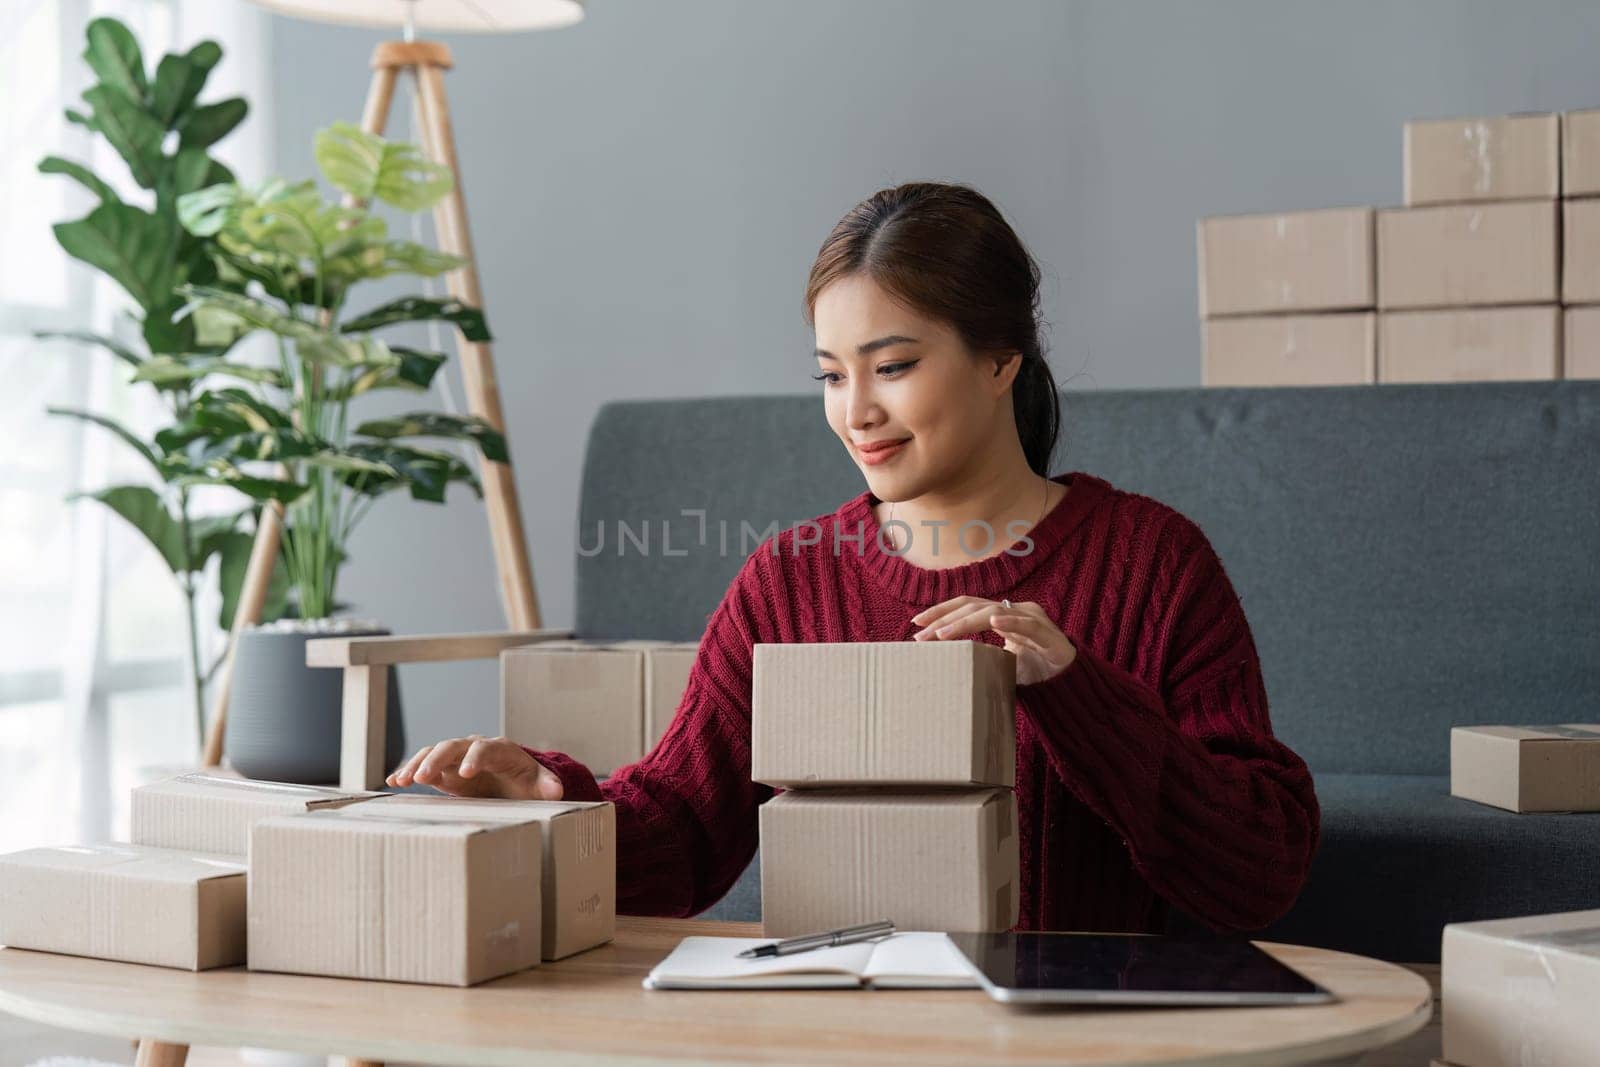 Asian woman holding parcel boxes and checking orders from tablet, she owns an online store, she packs and ships through a private transport company. Online selling and online shopping concepts.